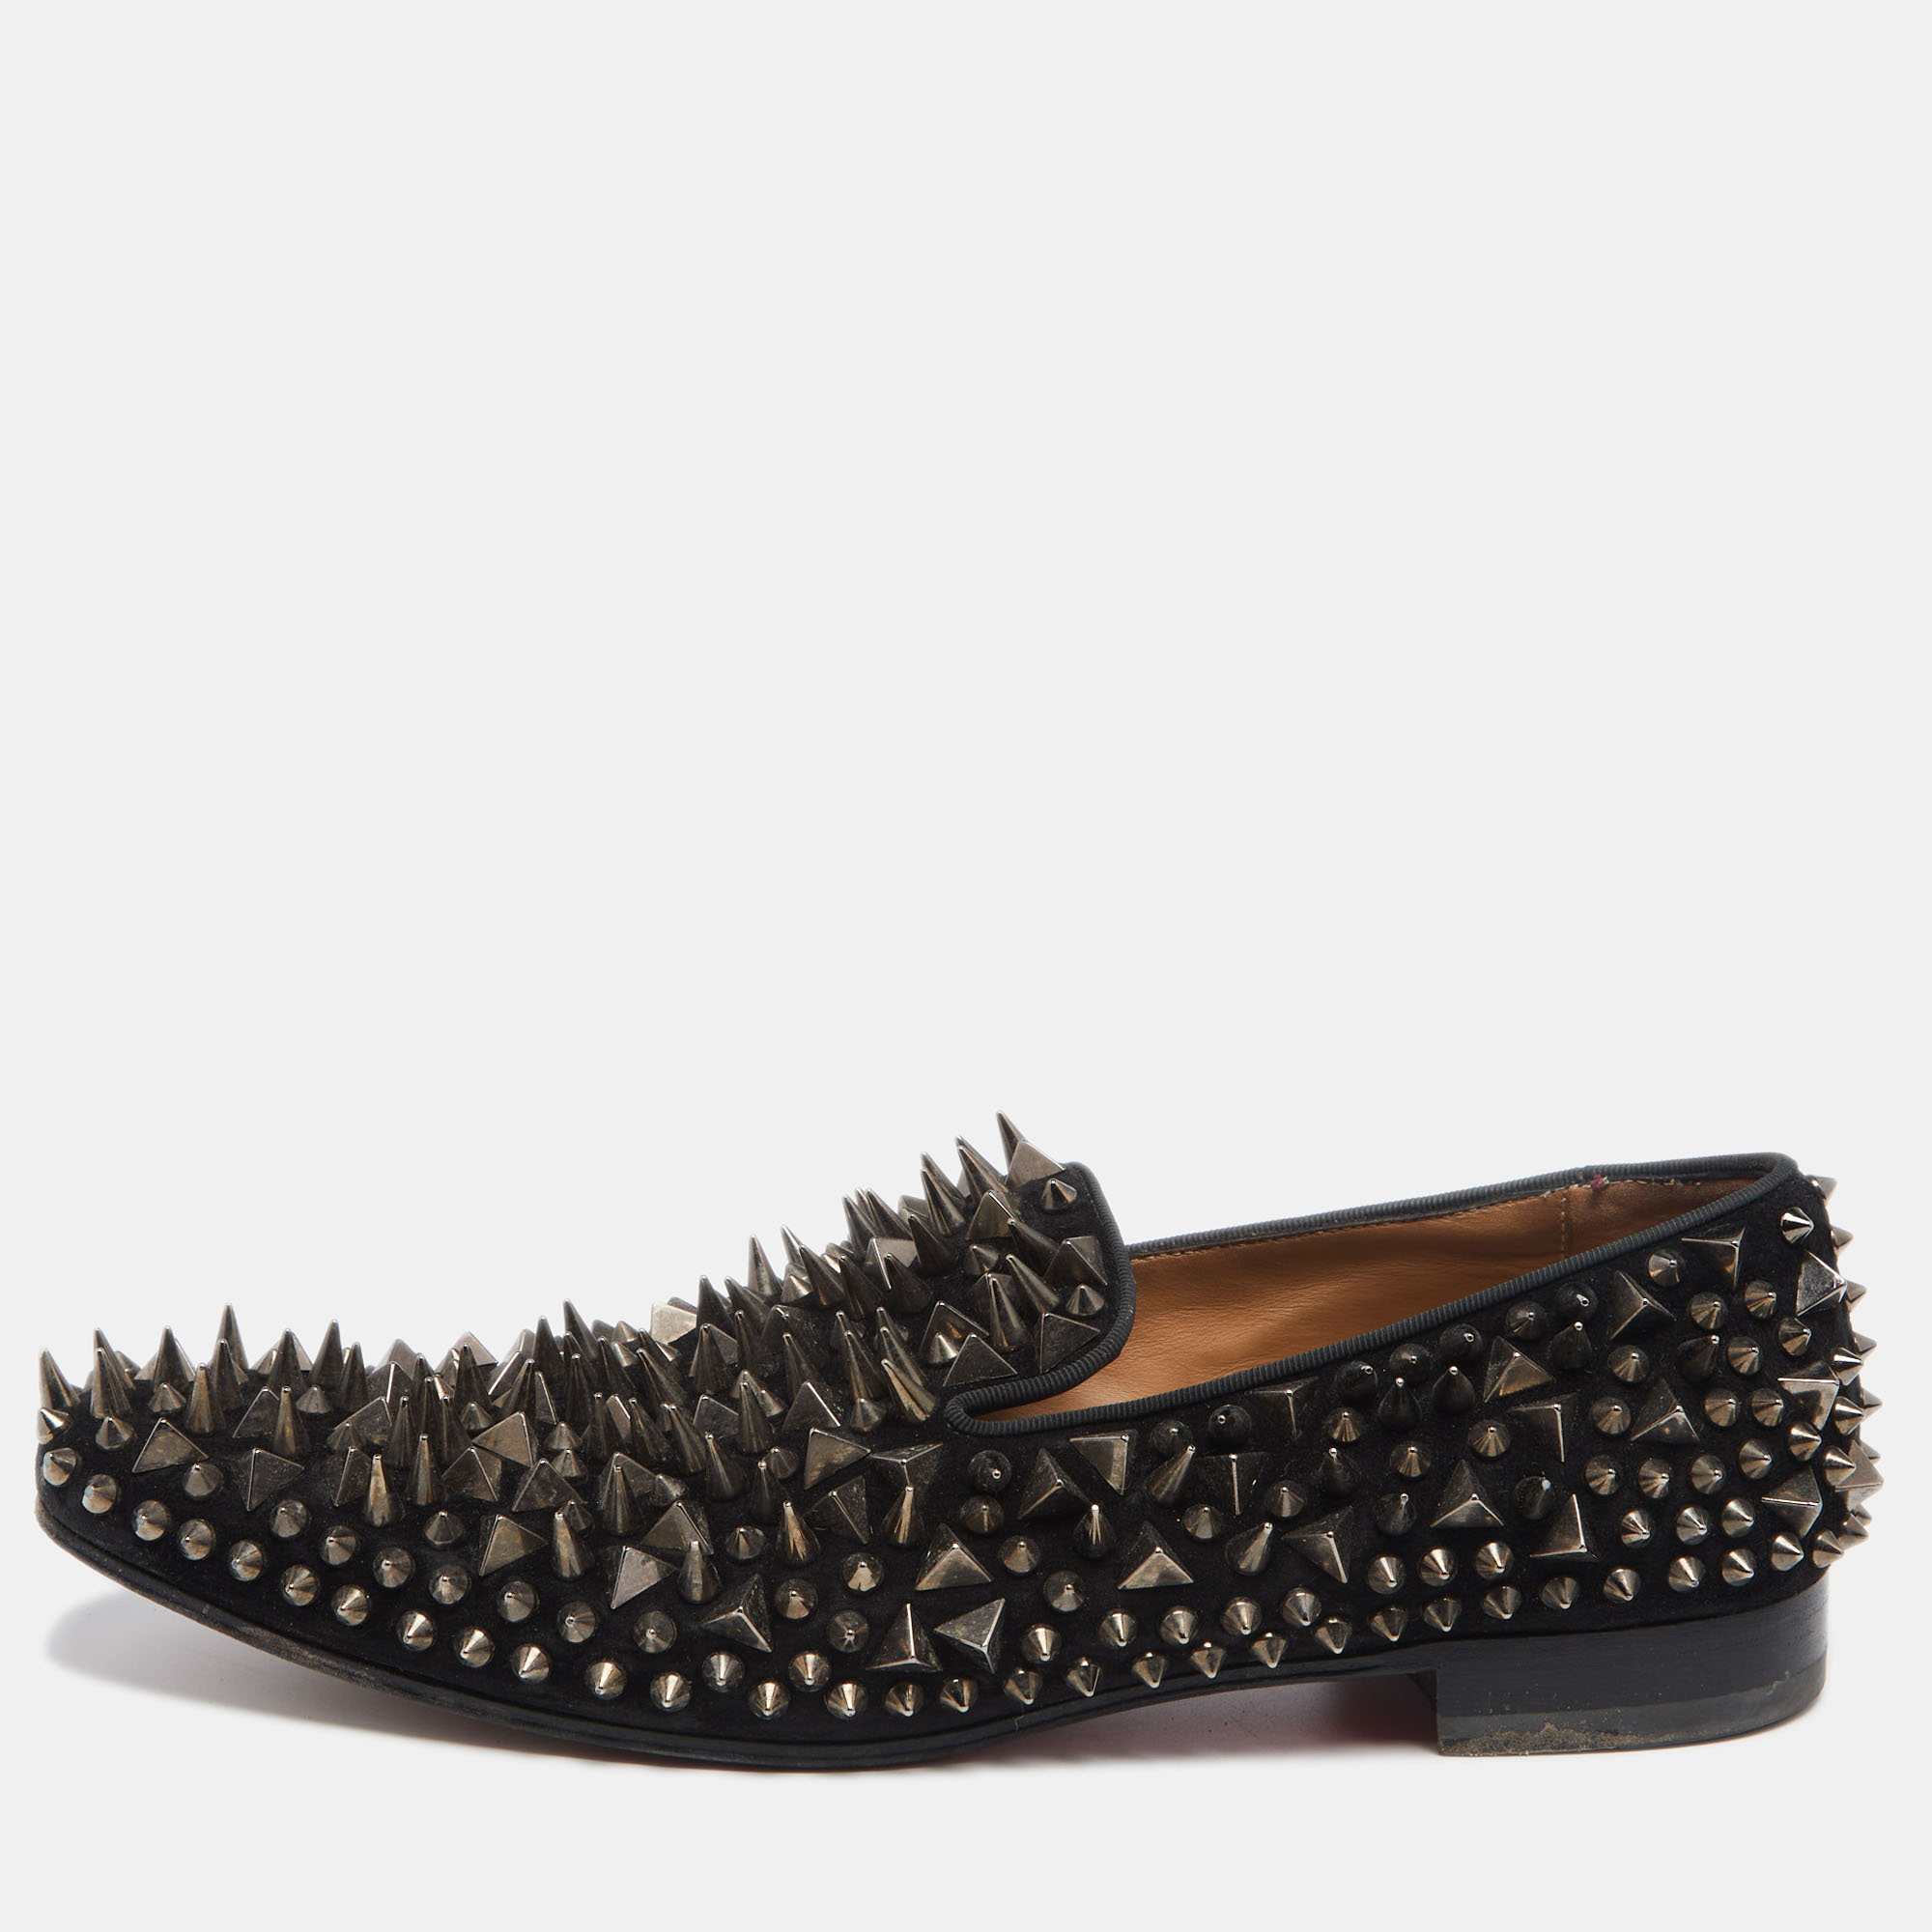 Pre-owned Christian Louboutin Black Suede Spike Loafers Size 42.5